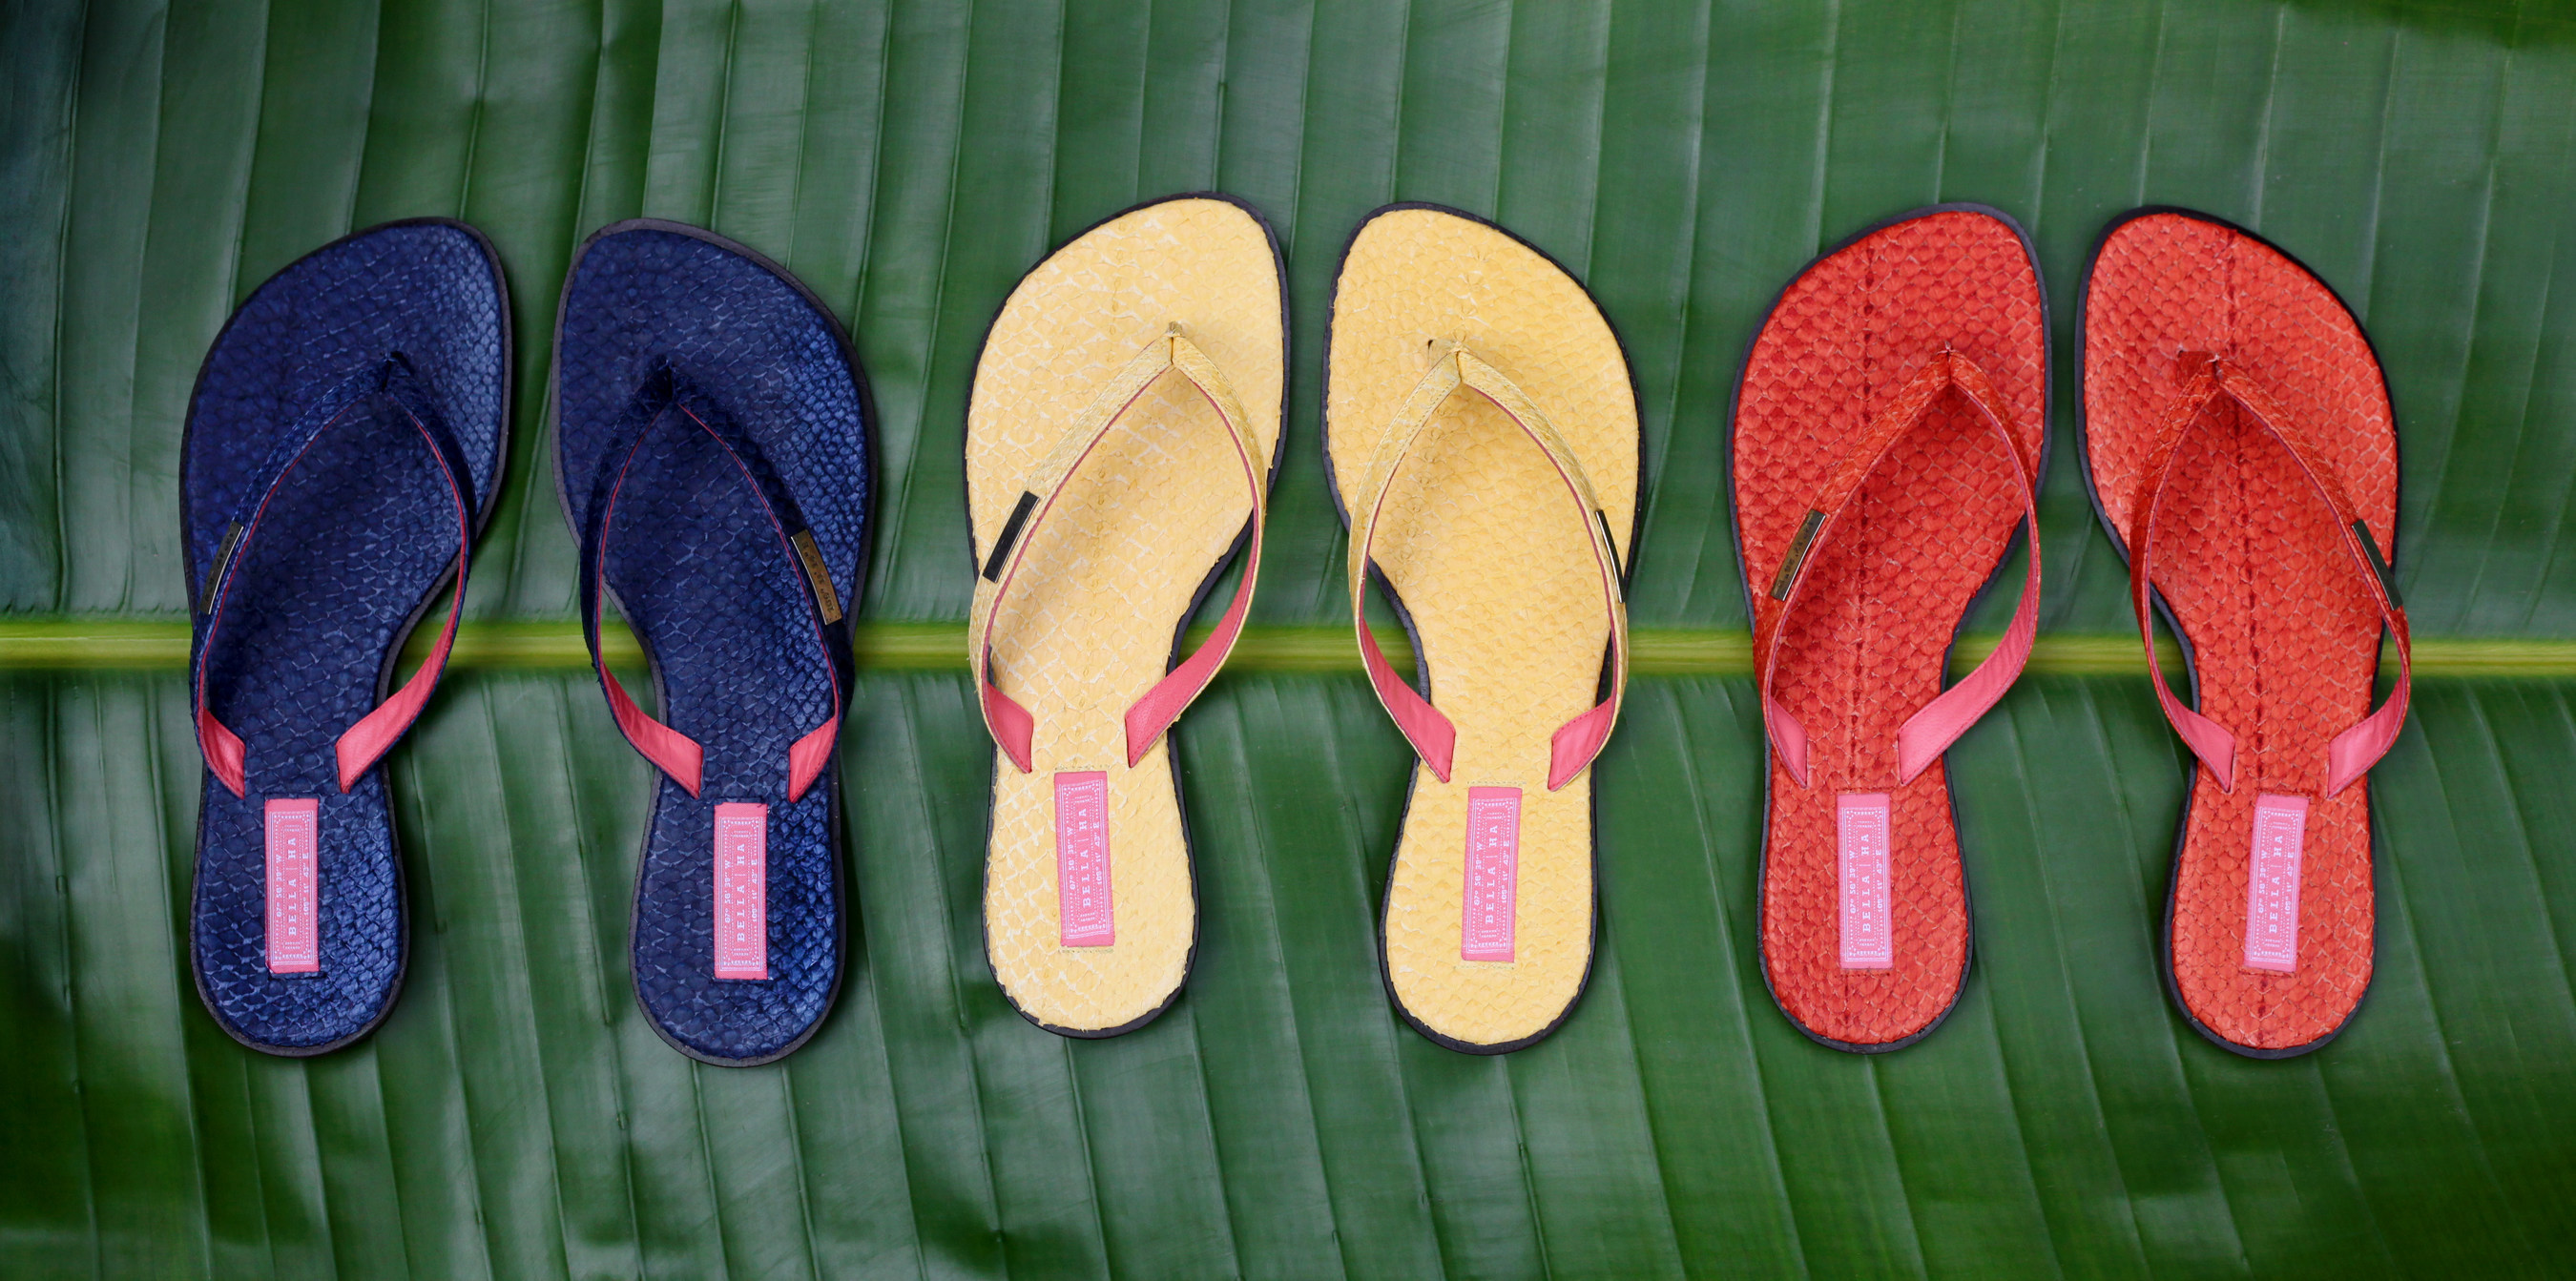 Three of the six different colors of Bella | Ha Khanh Hoa collection shoes. The tags on each shoe give the longitude and latitude of the Khanh Hoa province in Vietnam, where the first Solar Suitcase was donated.